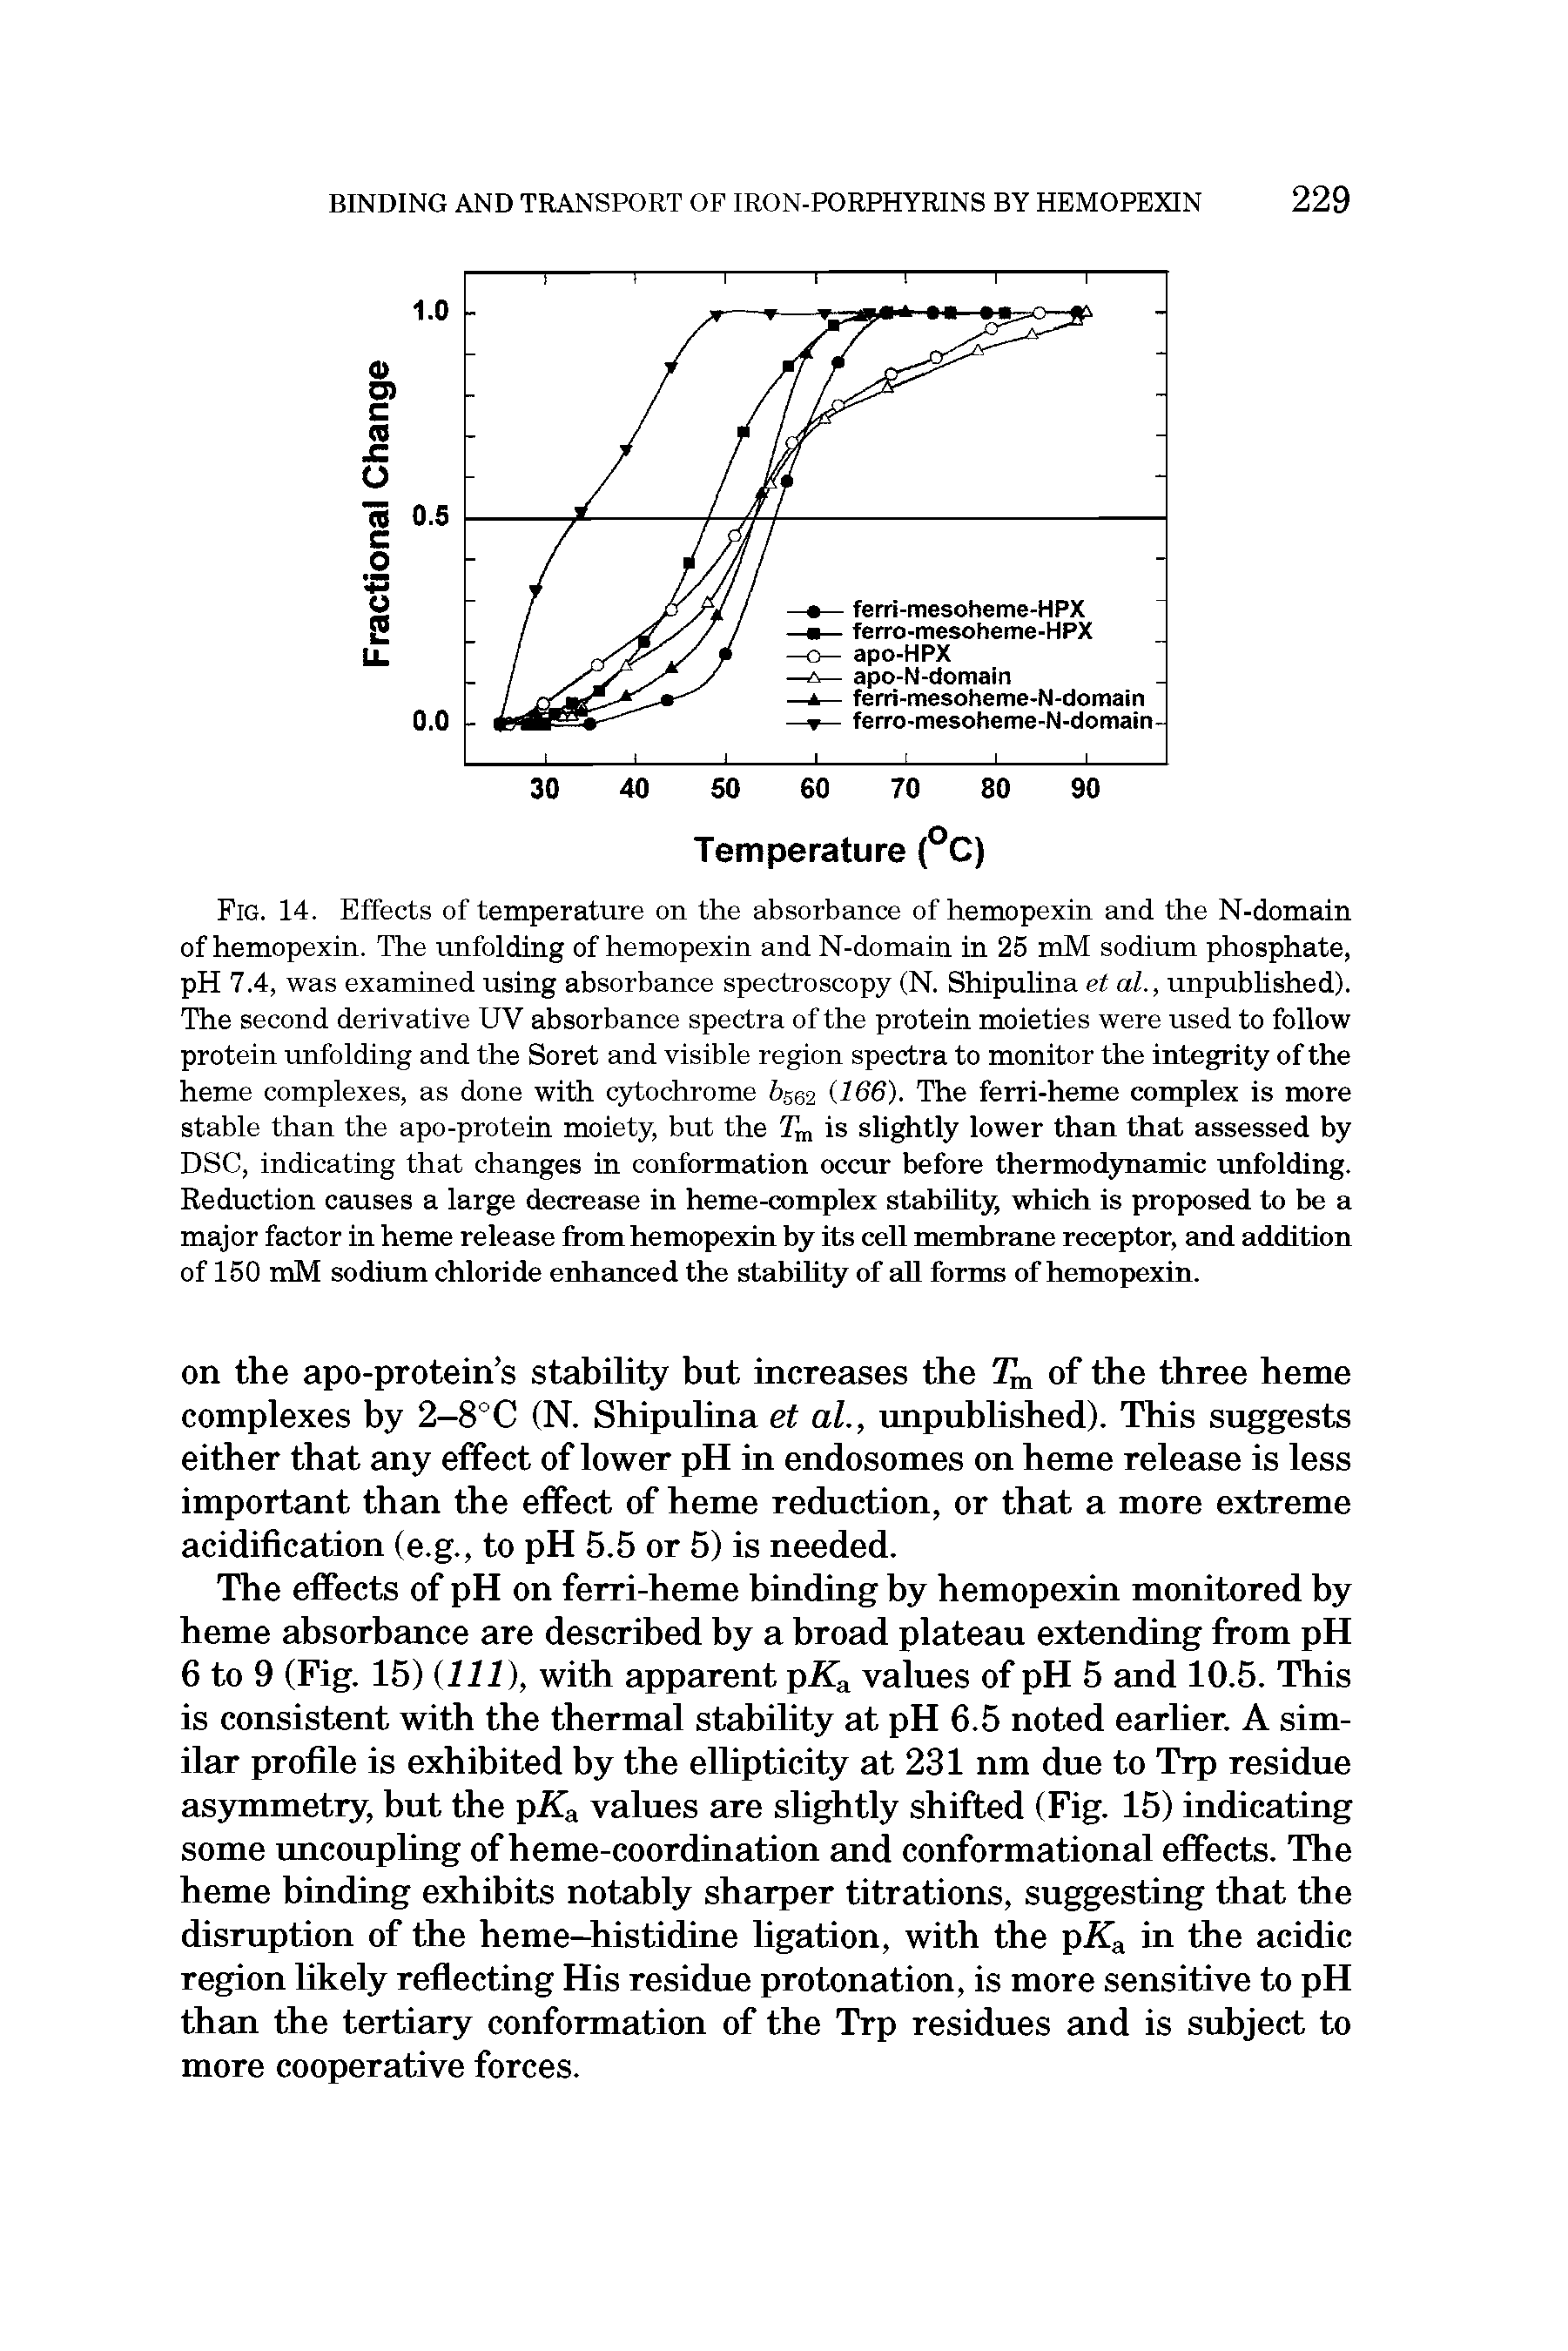 Fig. 14. Effects of temperature on the absorbance of hemopexin and the N-domain of hemopexin. The unfolding of hemopexin and N-domain in 25 mM sodium phosphate, pH 7.4, was examined using absorbance spectroscopy (N. Shipulina et al., unpublished). The second derivative UV absorbance spectra of the protein moieties were used to follow protein unfolding and the Soret and visible region spectra to monitor the integrity of the heme complexes, as done with cytochrome 6502 (166). The ferri-heme complex is more stable than the apo-protein moiety, but the is slightly lower than that assessed by DSC, indicating that changes in conformation occur before thermodynamic unfolding. Reduction causes a large decrease in heme-complex stabihty, which is proposed to be a major factor in heme release from hemopexin by its cell membrane receptor, and addition of 150 mM sodium chloride enhanced the stabihty of ah forms of hemopexin.